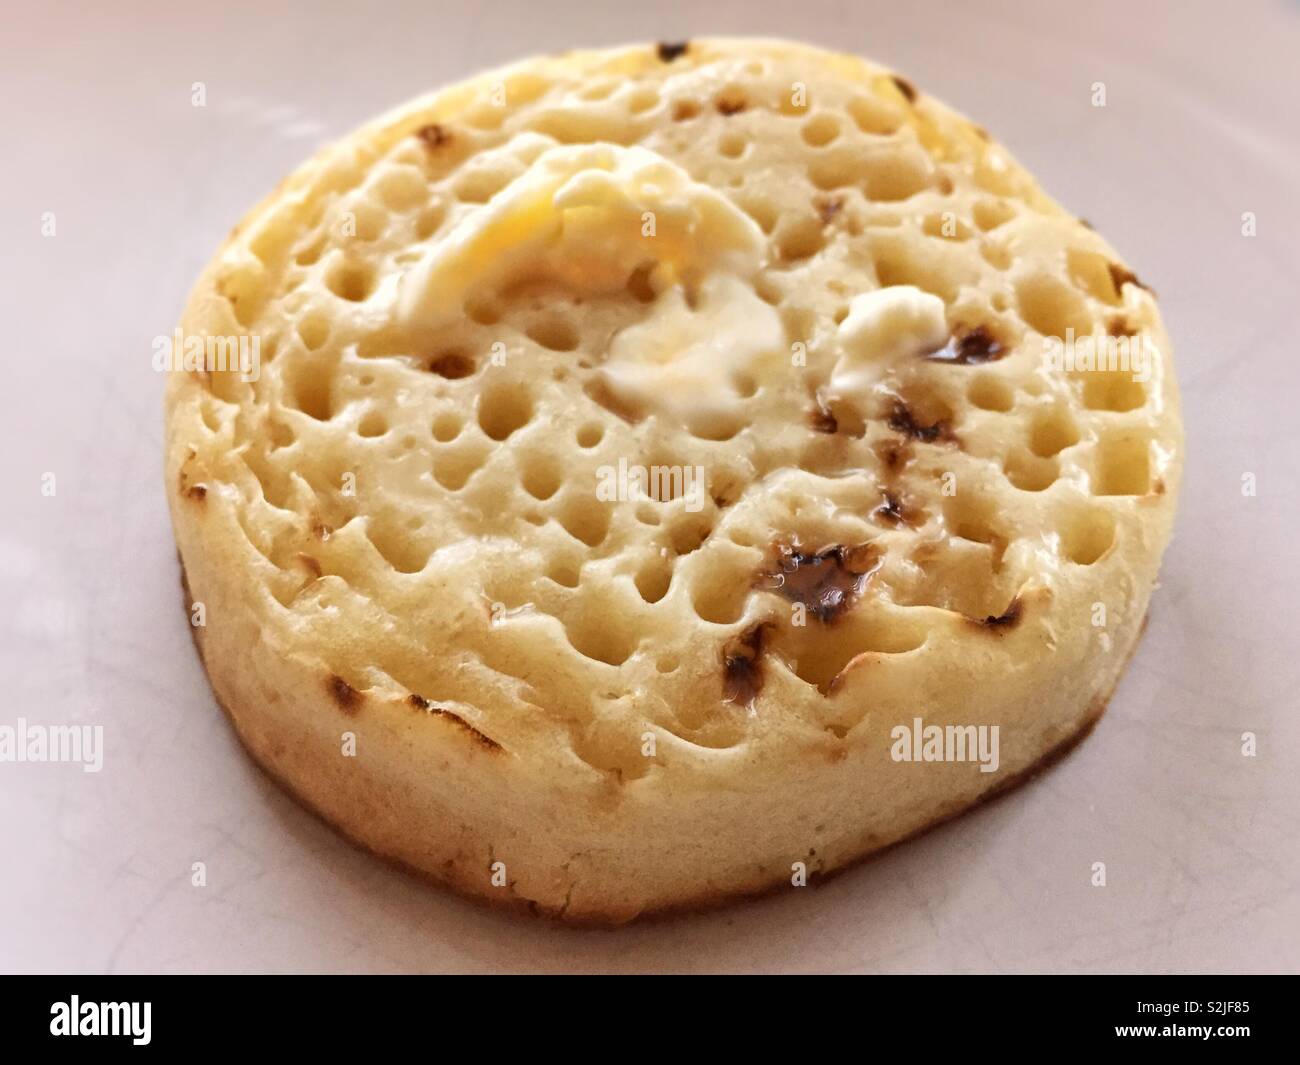 Hot buttered crumpet.  Lovely English breakfast food.  Buttery melting into the tiny baked holes.  Delicious start to the day and served with a cup or pot of tea.  Toast or toasted Stock Photo